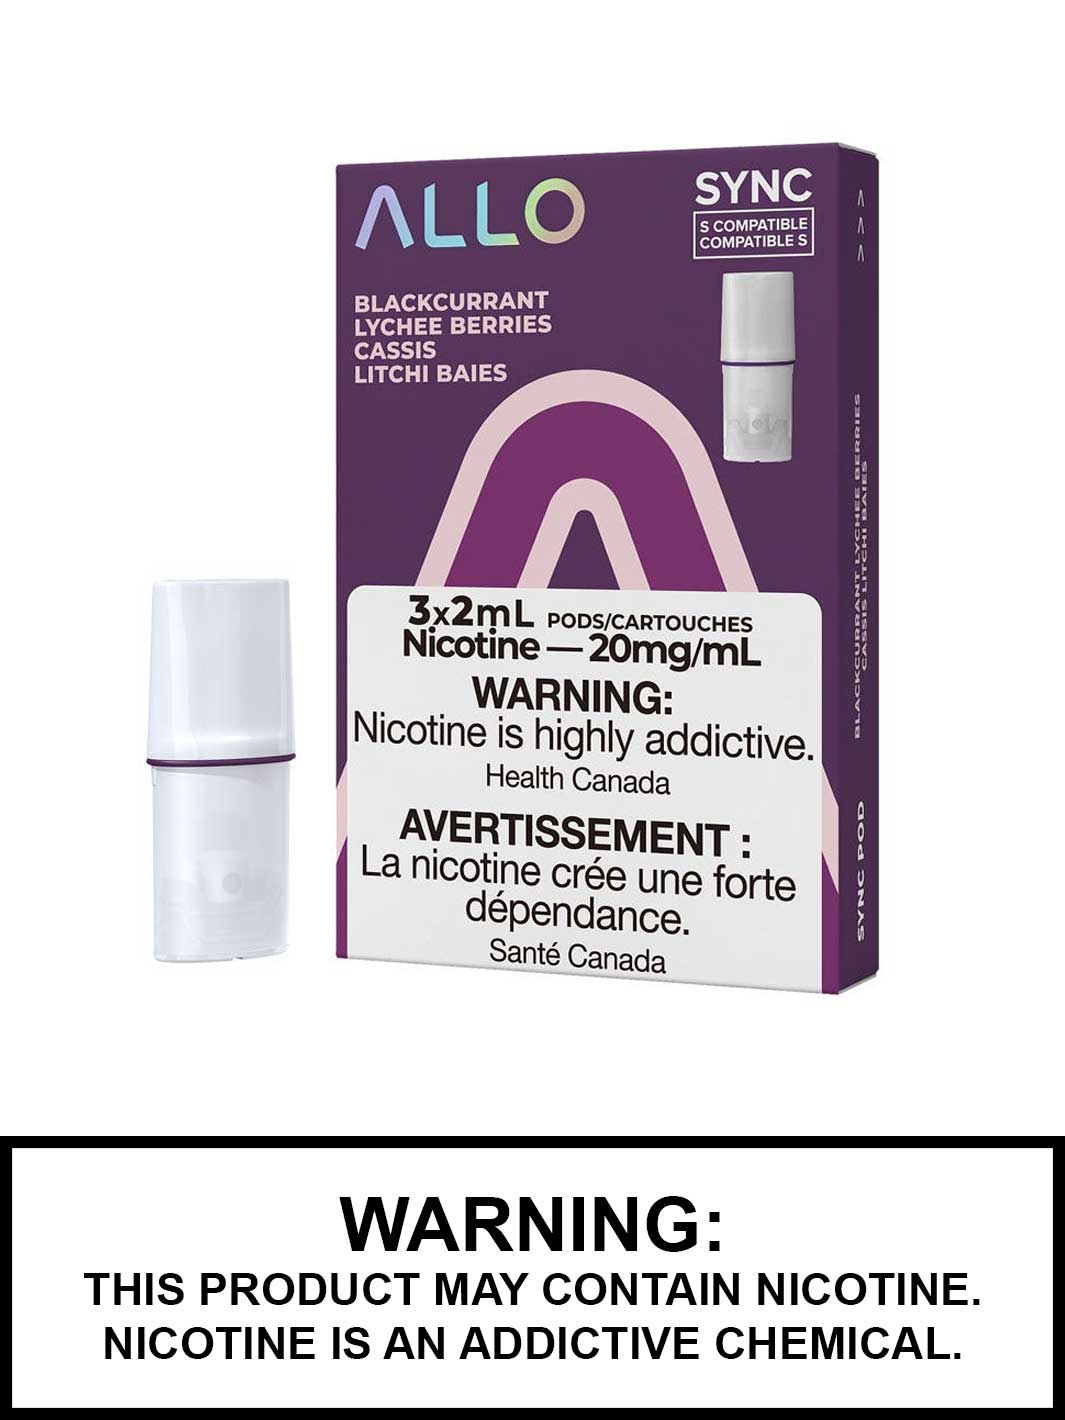 Blackcurrant Lychee Berries Allo Pods, Allo Sync Pods,  STLTH Compatible Pods, Vape360 Canada